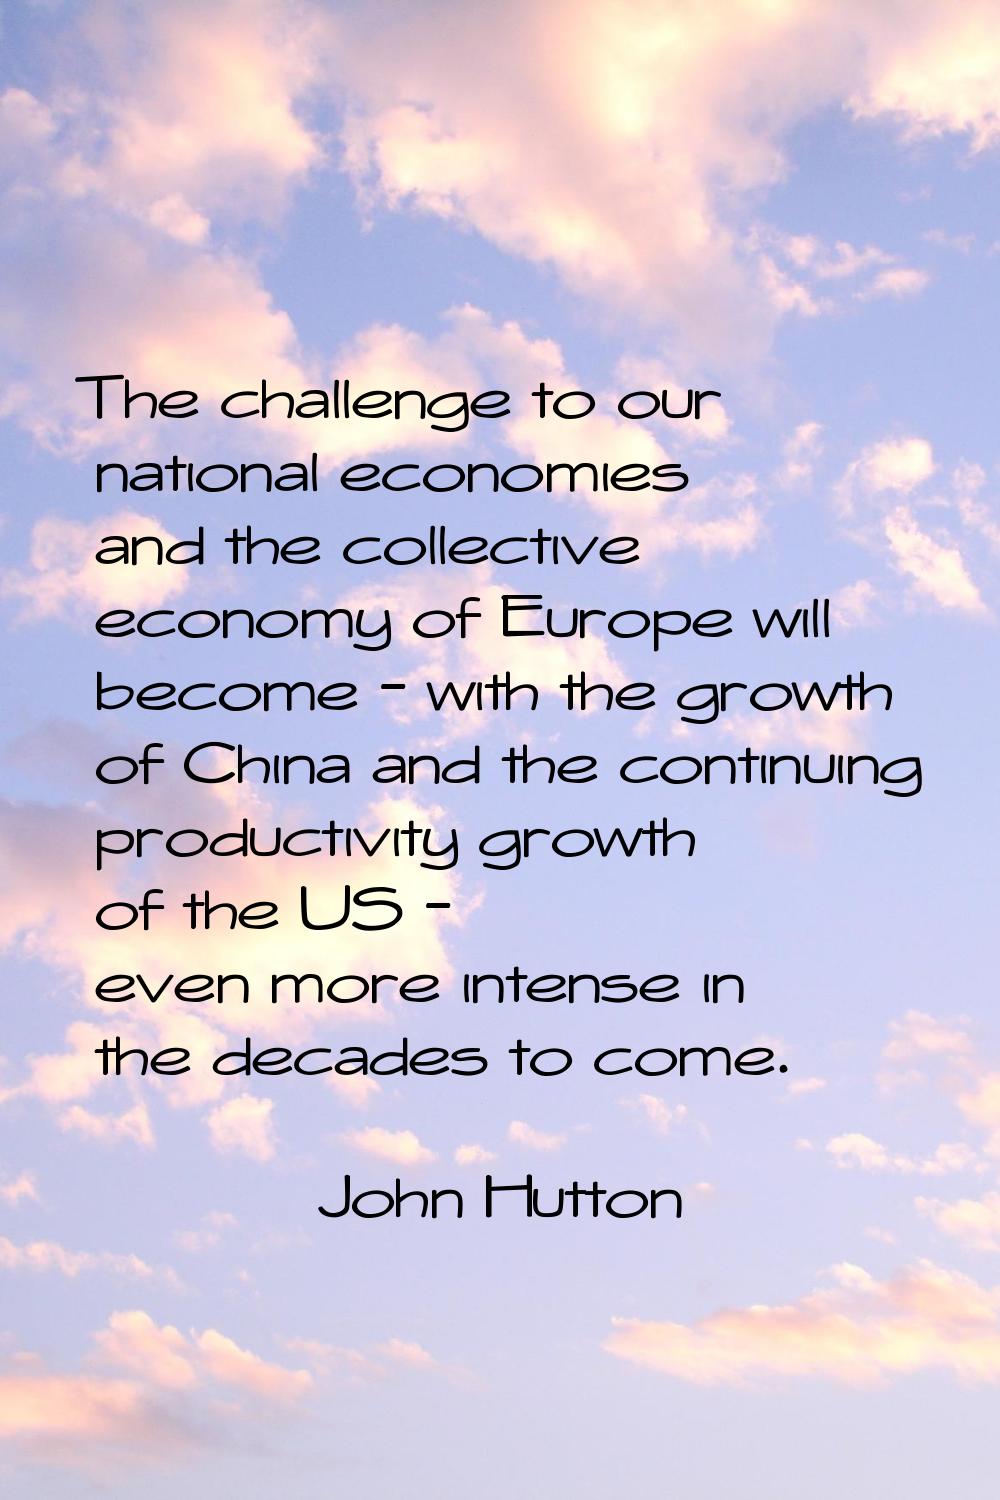 The challenge to our national economies and the collective economy of Europe will become - with the